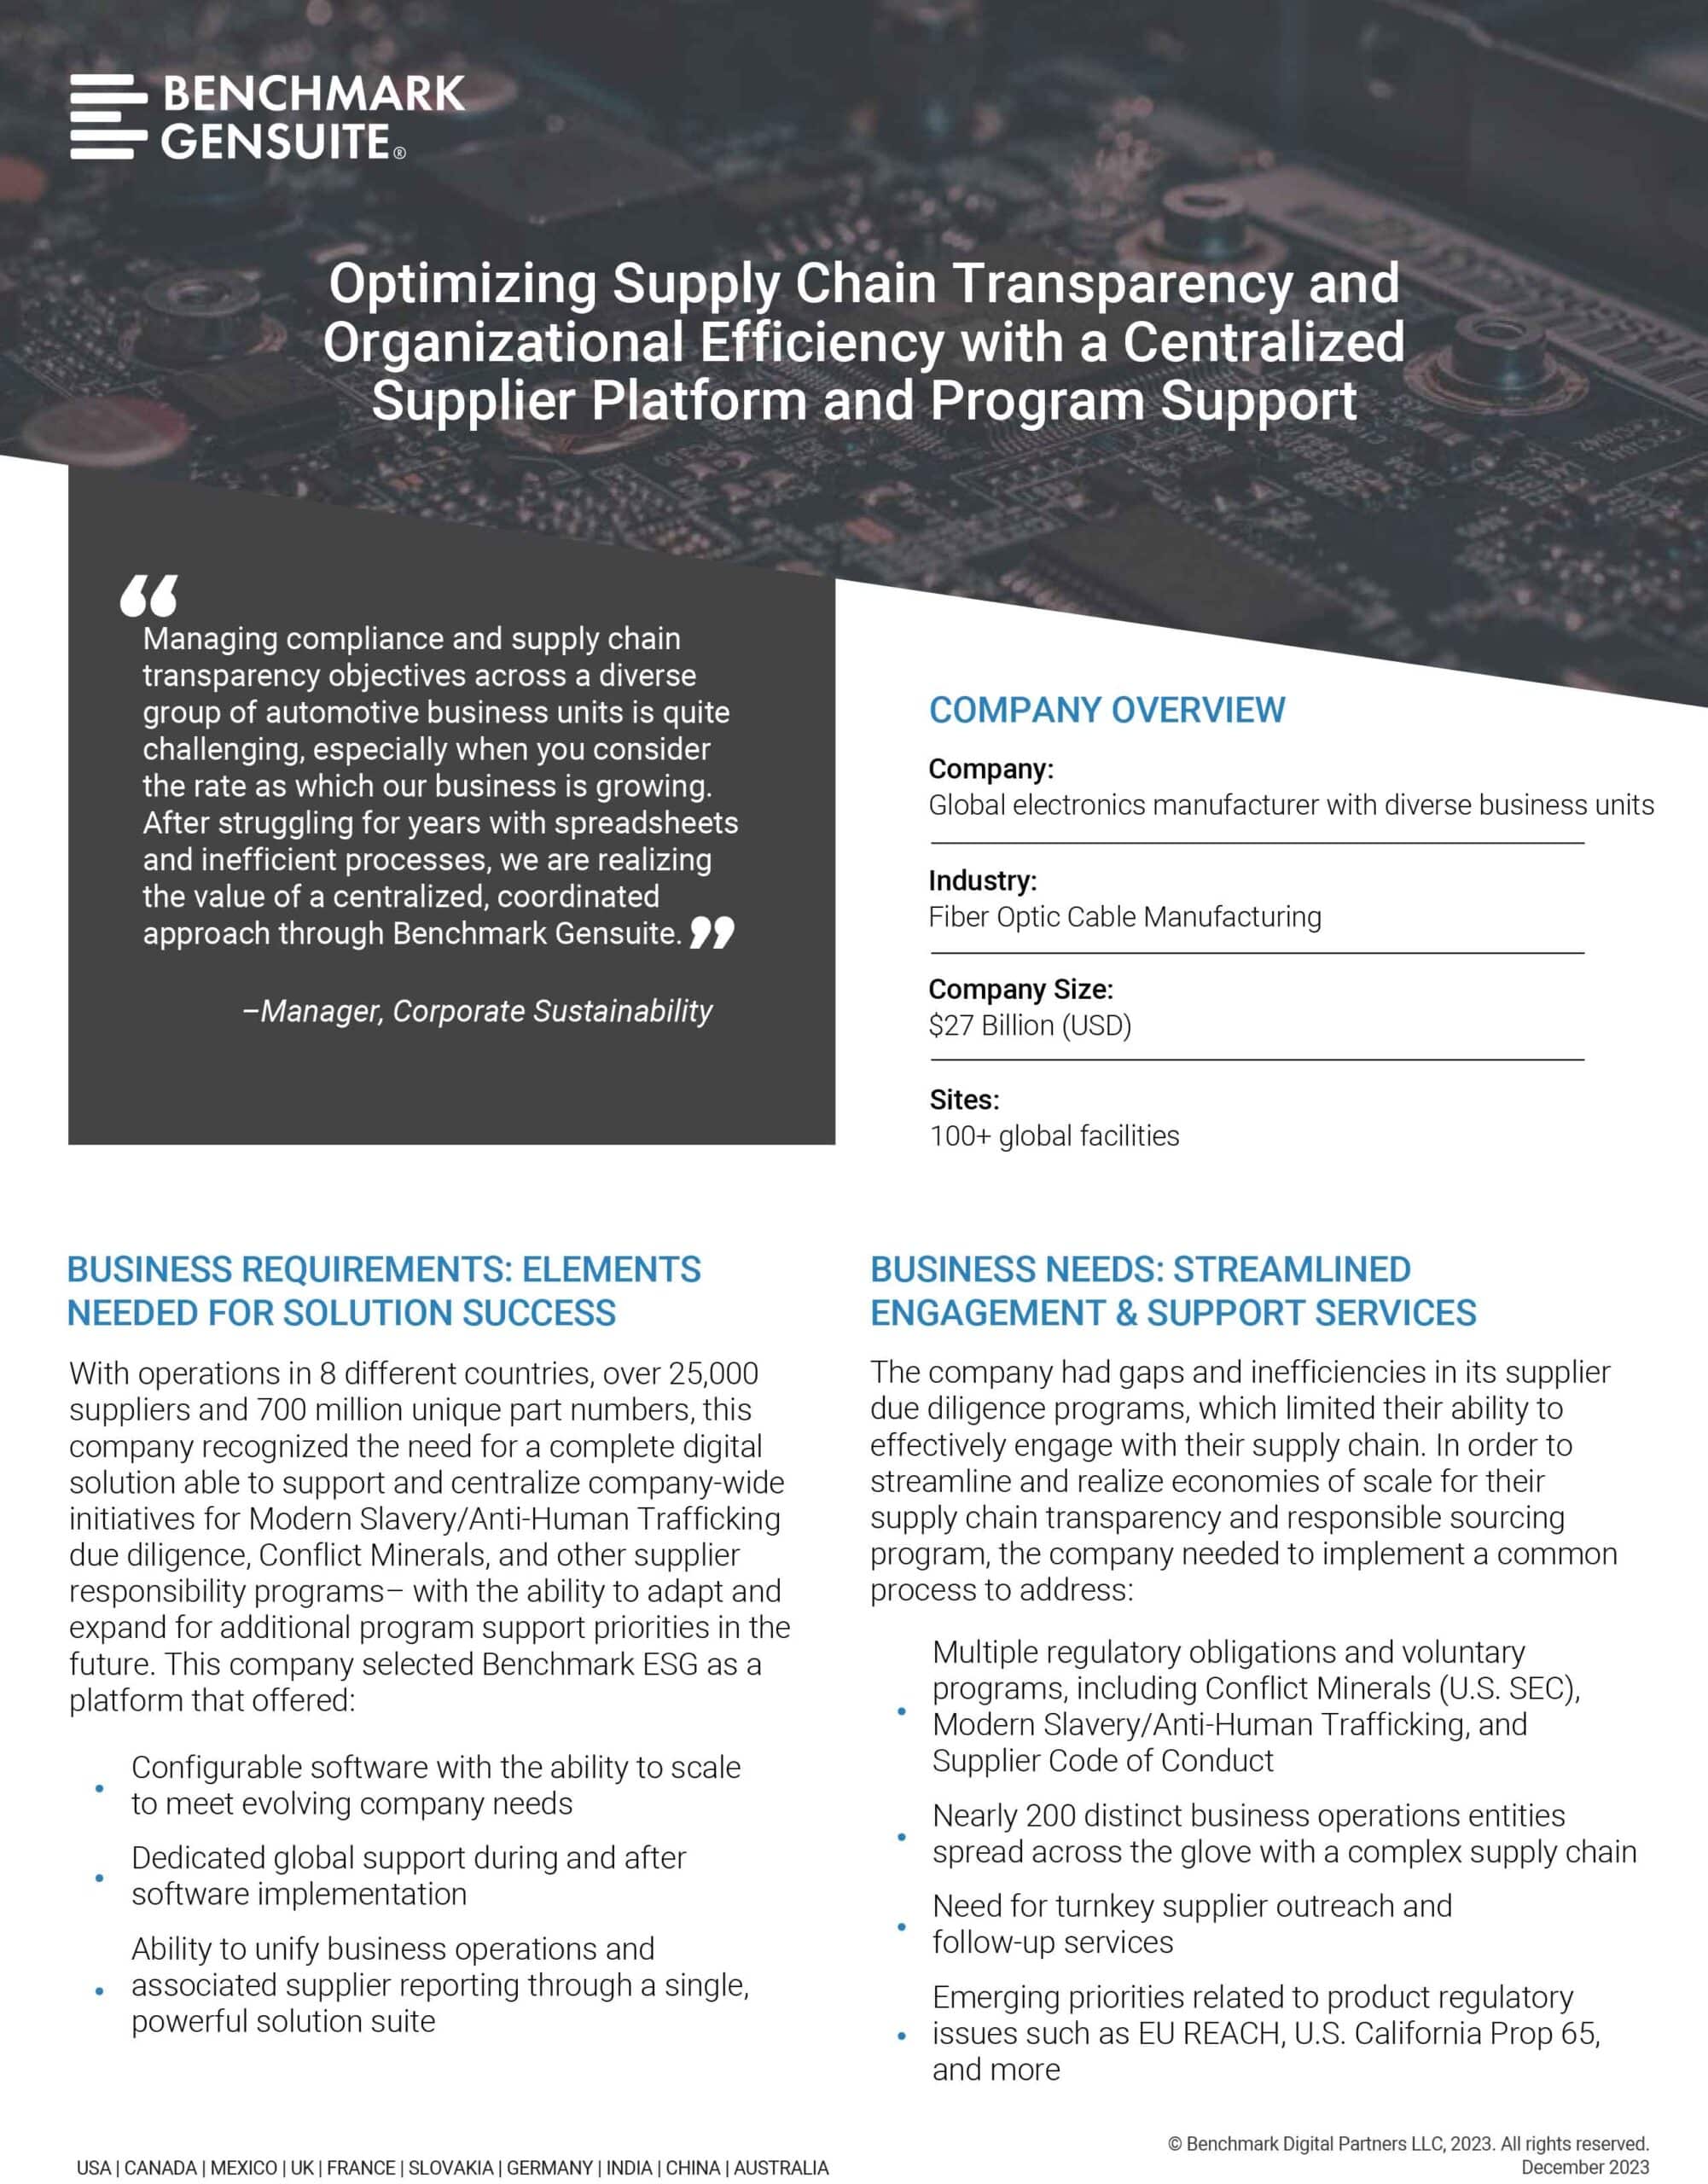 Optimizing Supply Chain Transparency and Organizational Efficiency with a Centralized Supplier Platform and Program Support